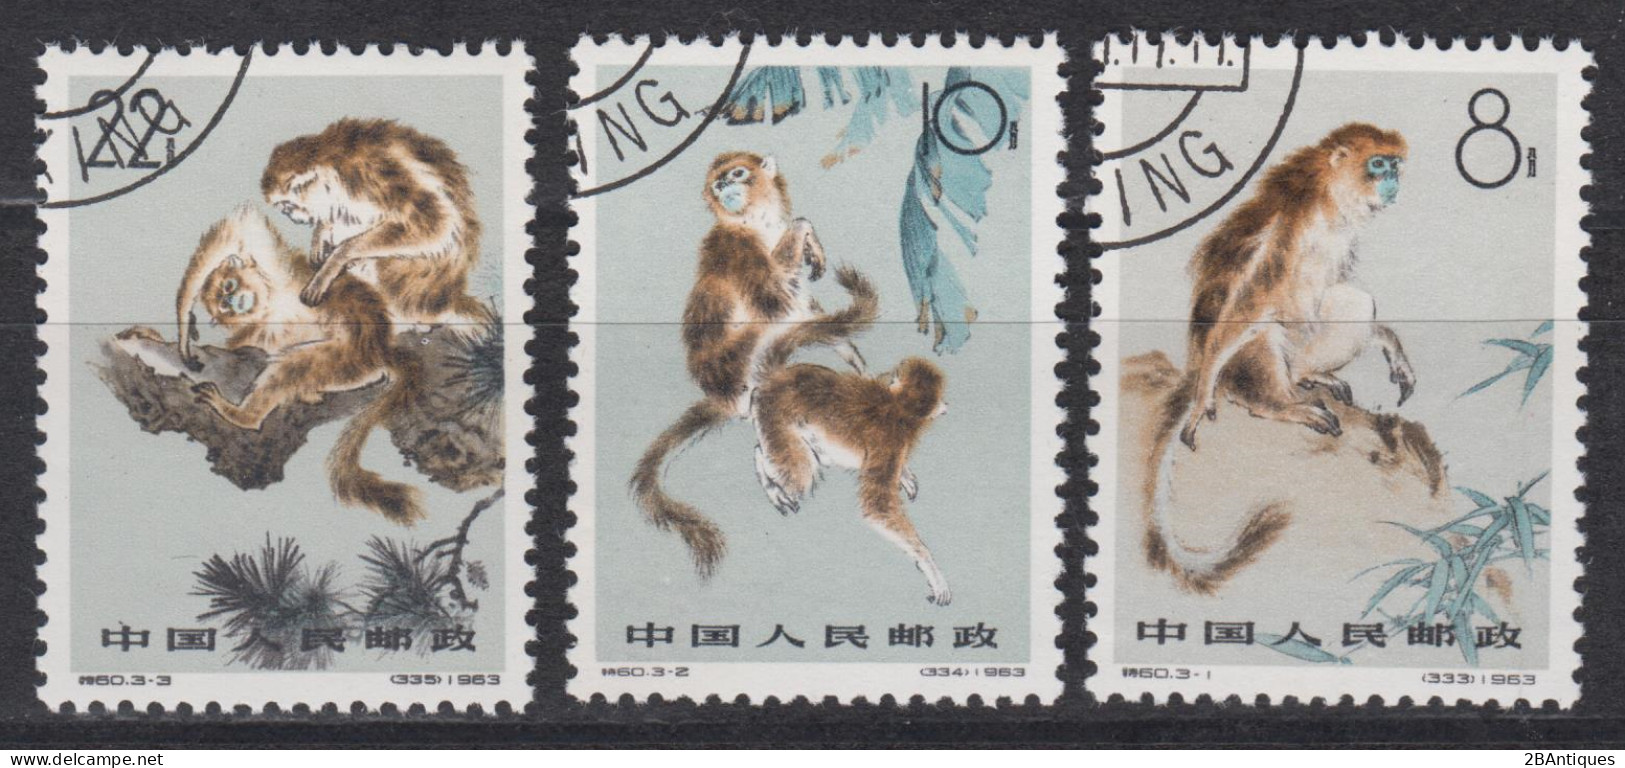 PR CHINA 1963 - Snub-nosed Monkeys CTO - Used Stamps